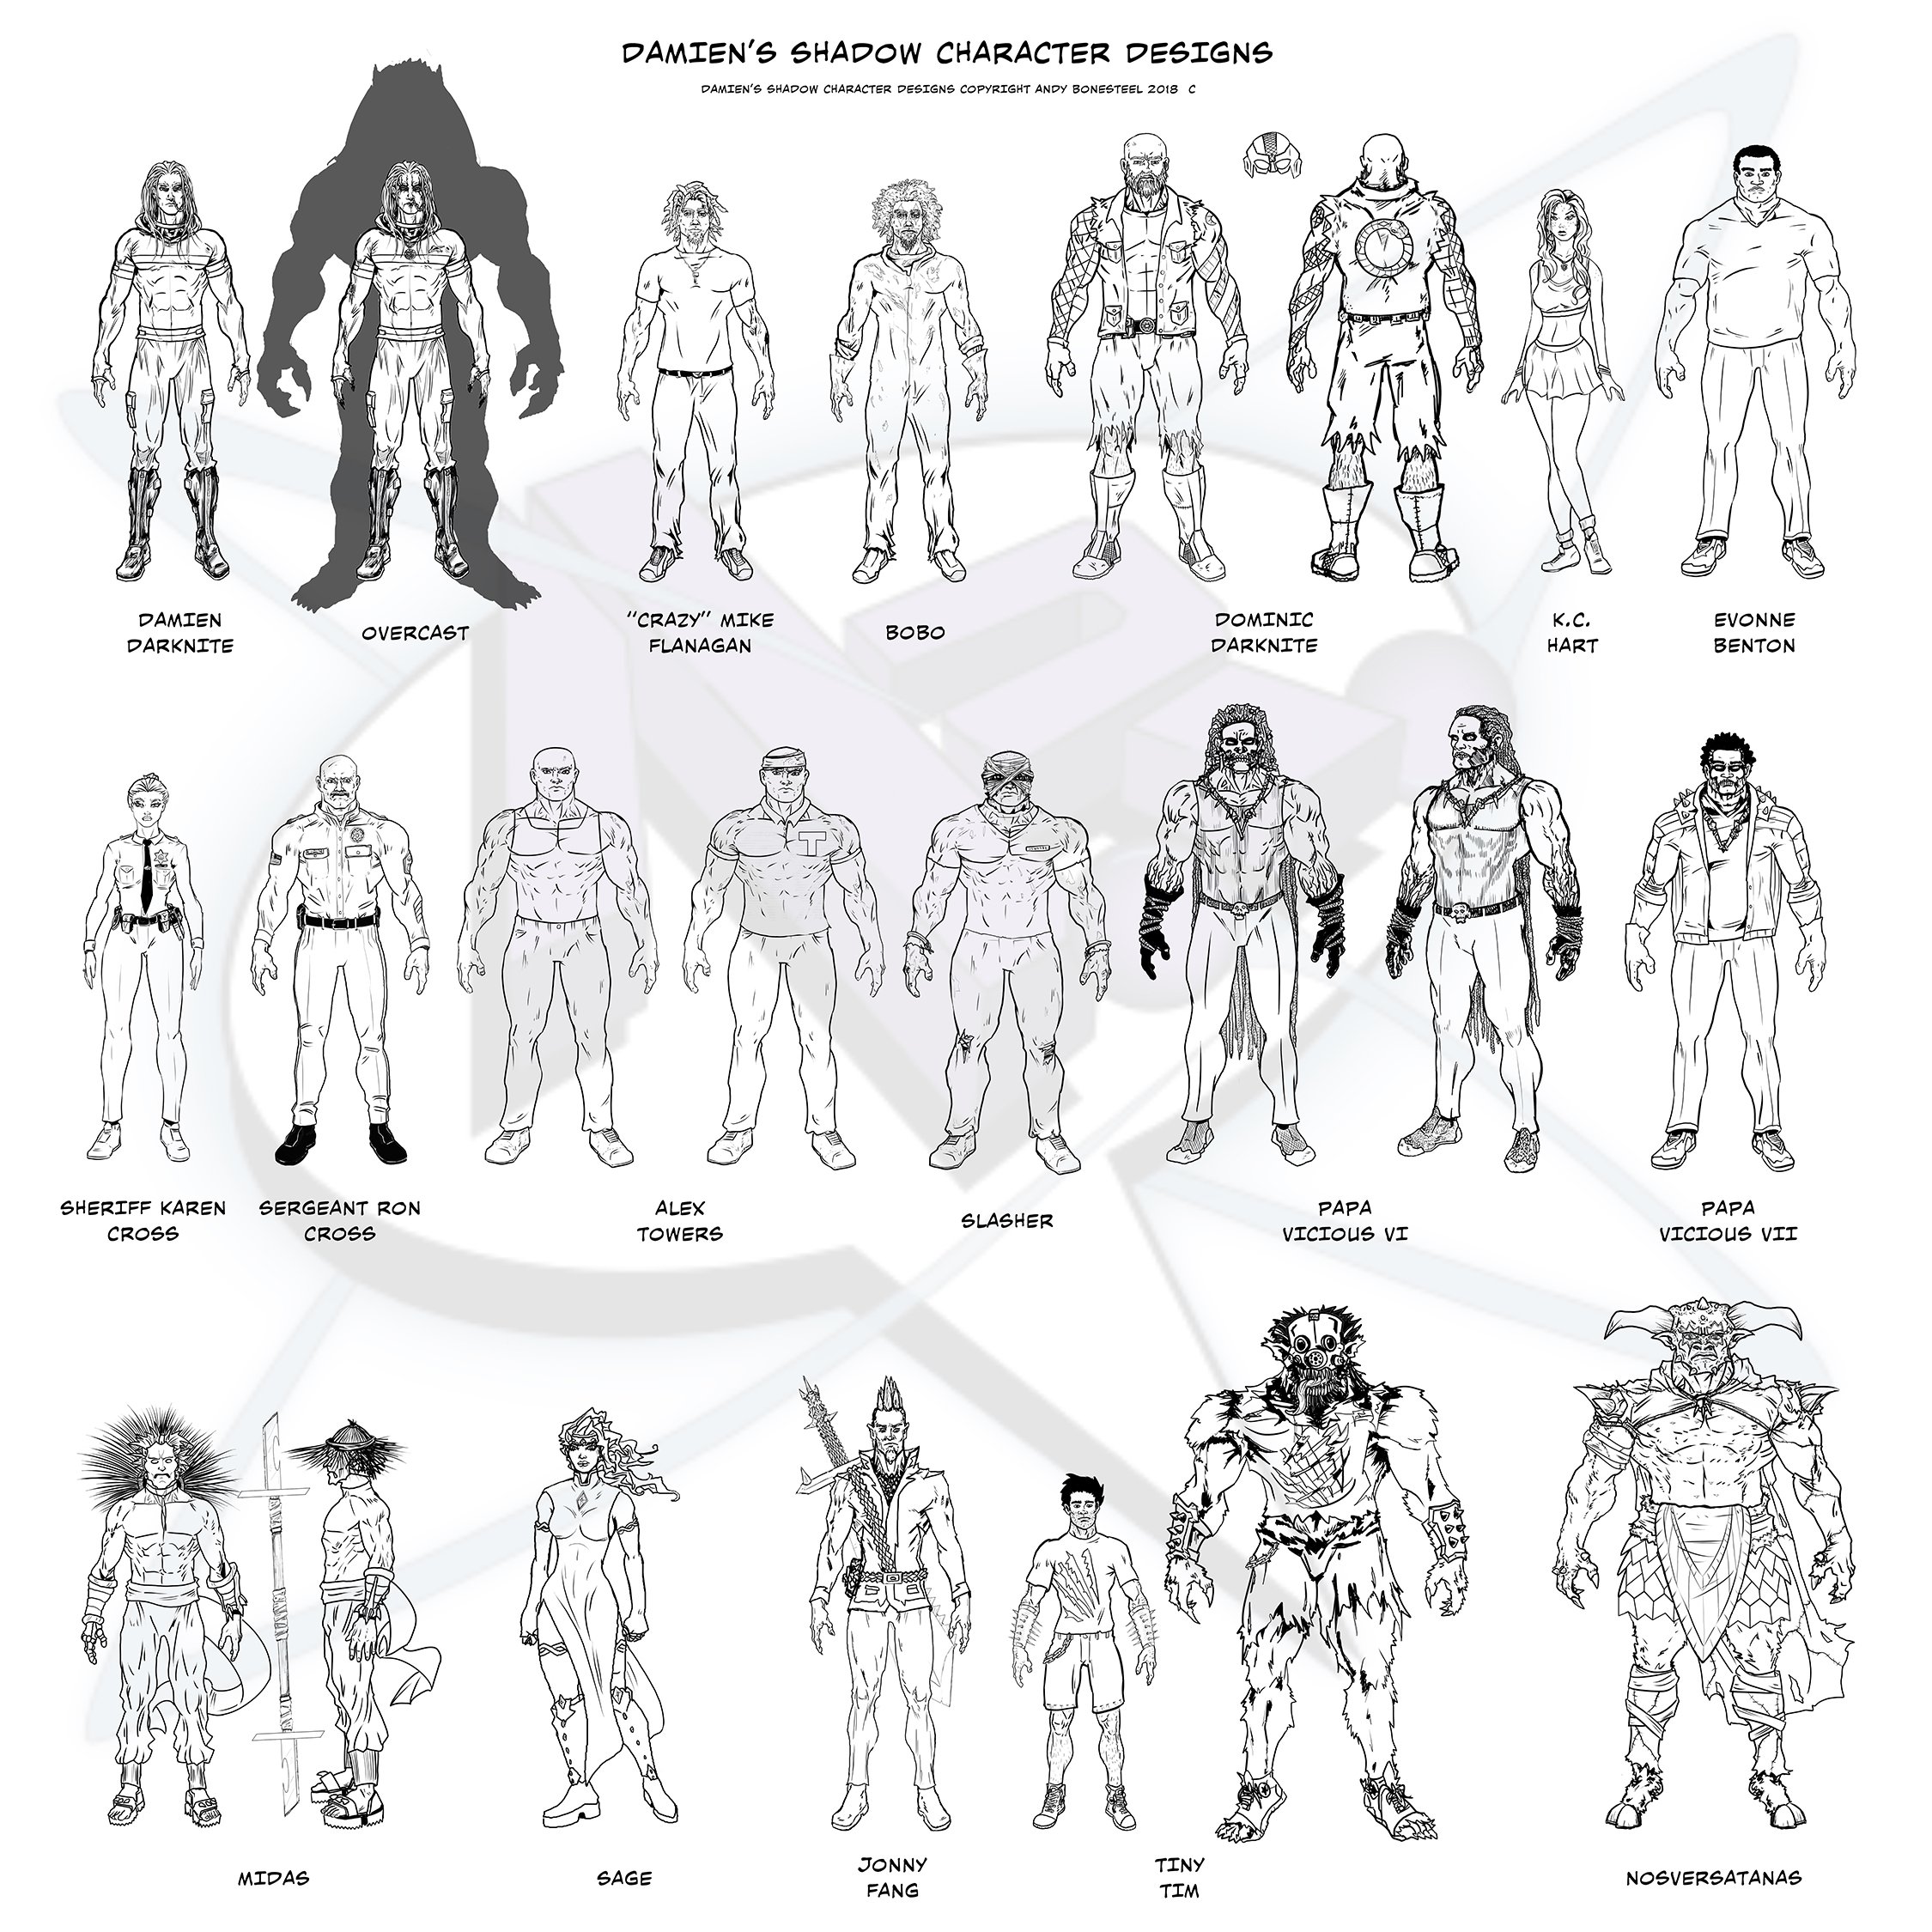 CHARACTERS LAYERSlow res.jpg